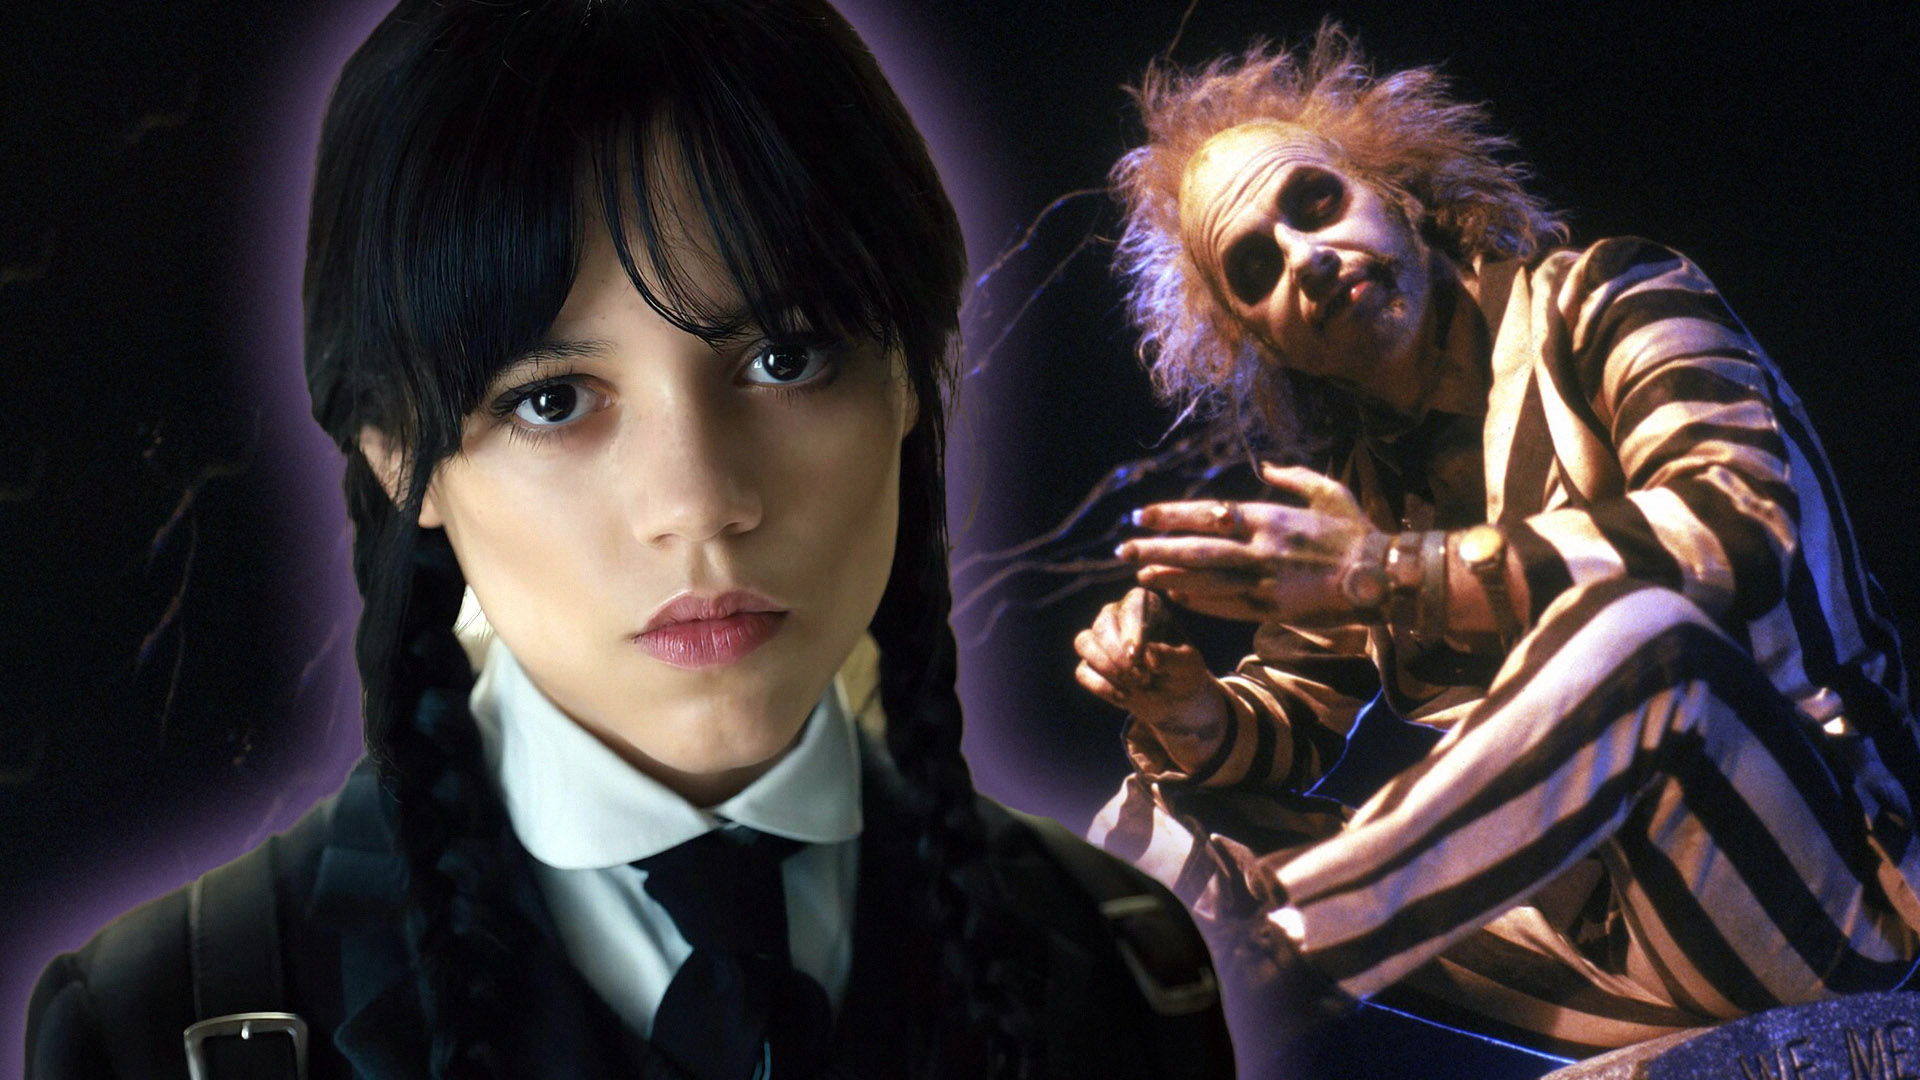 Who Will Wednesday's Jenna Ortega Play in the Beetlejuice Sequel?